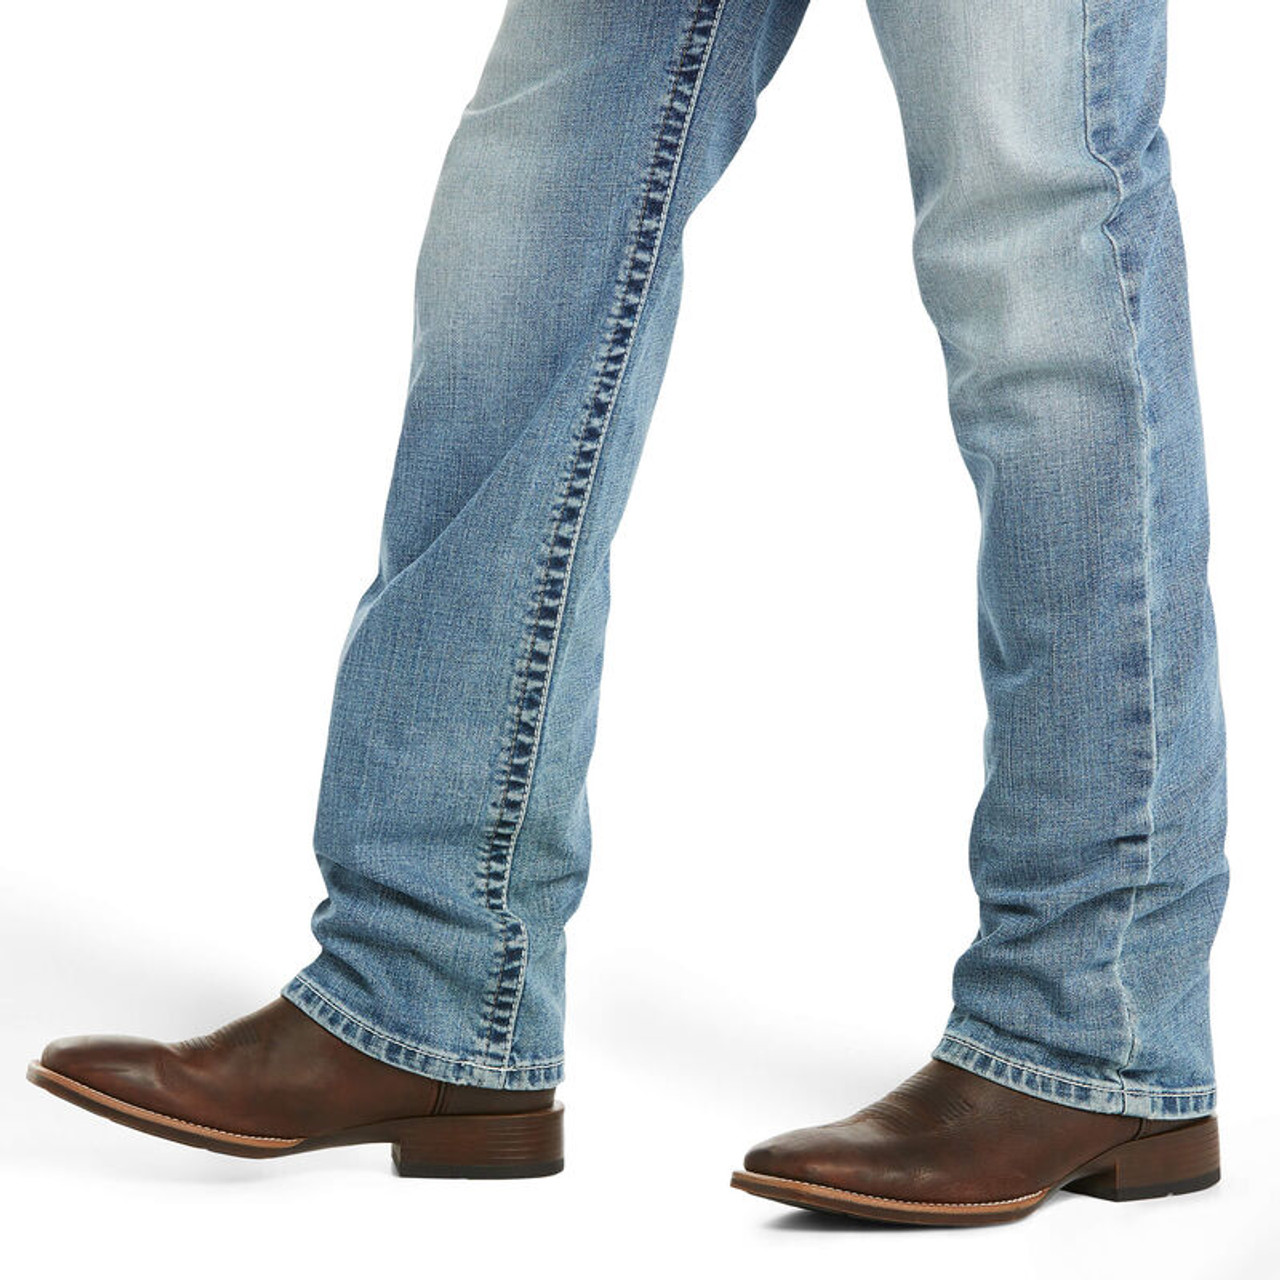 Ariat Men's Jeans - M2 Relaxed Stirling Stretch - Boot Cut - Shasta ...